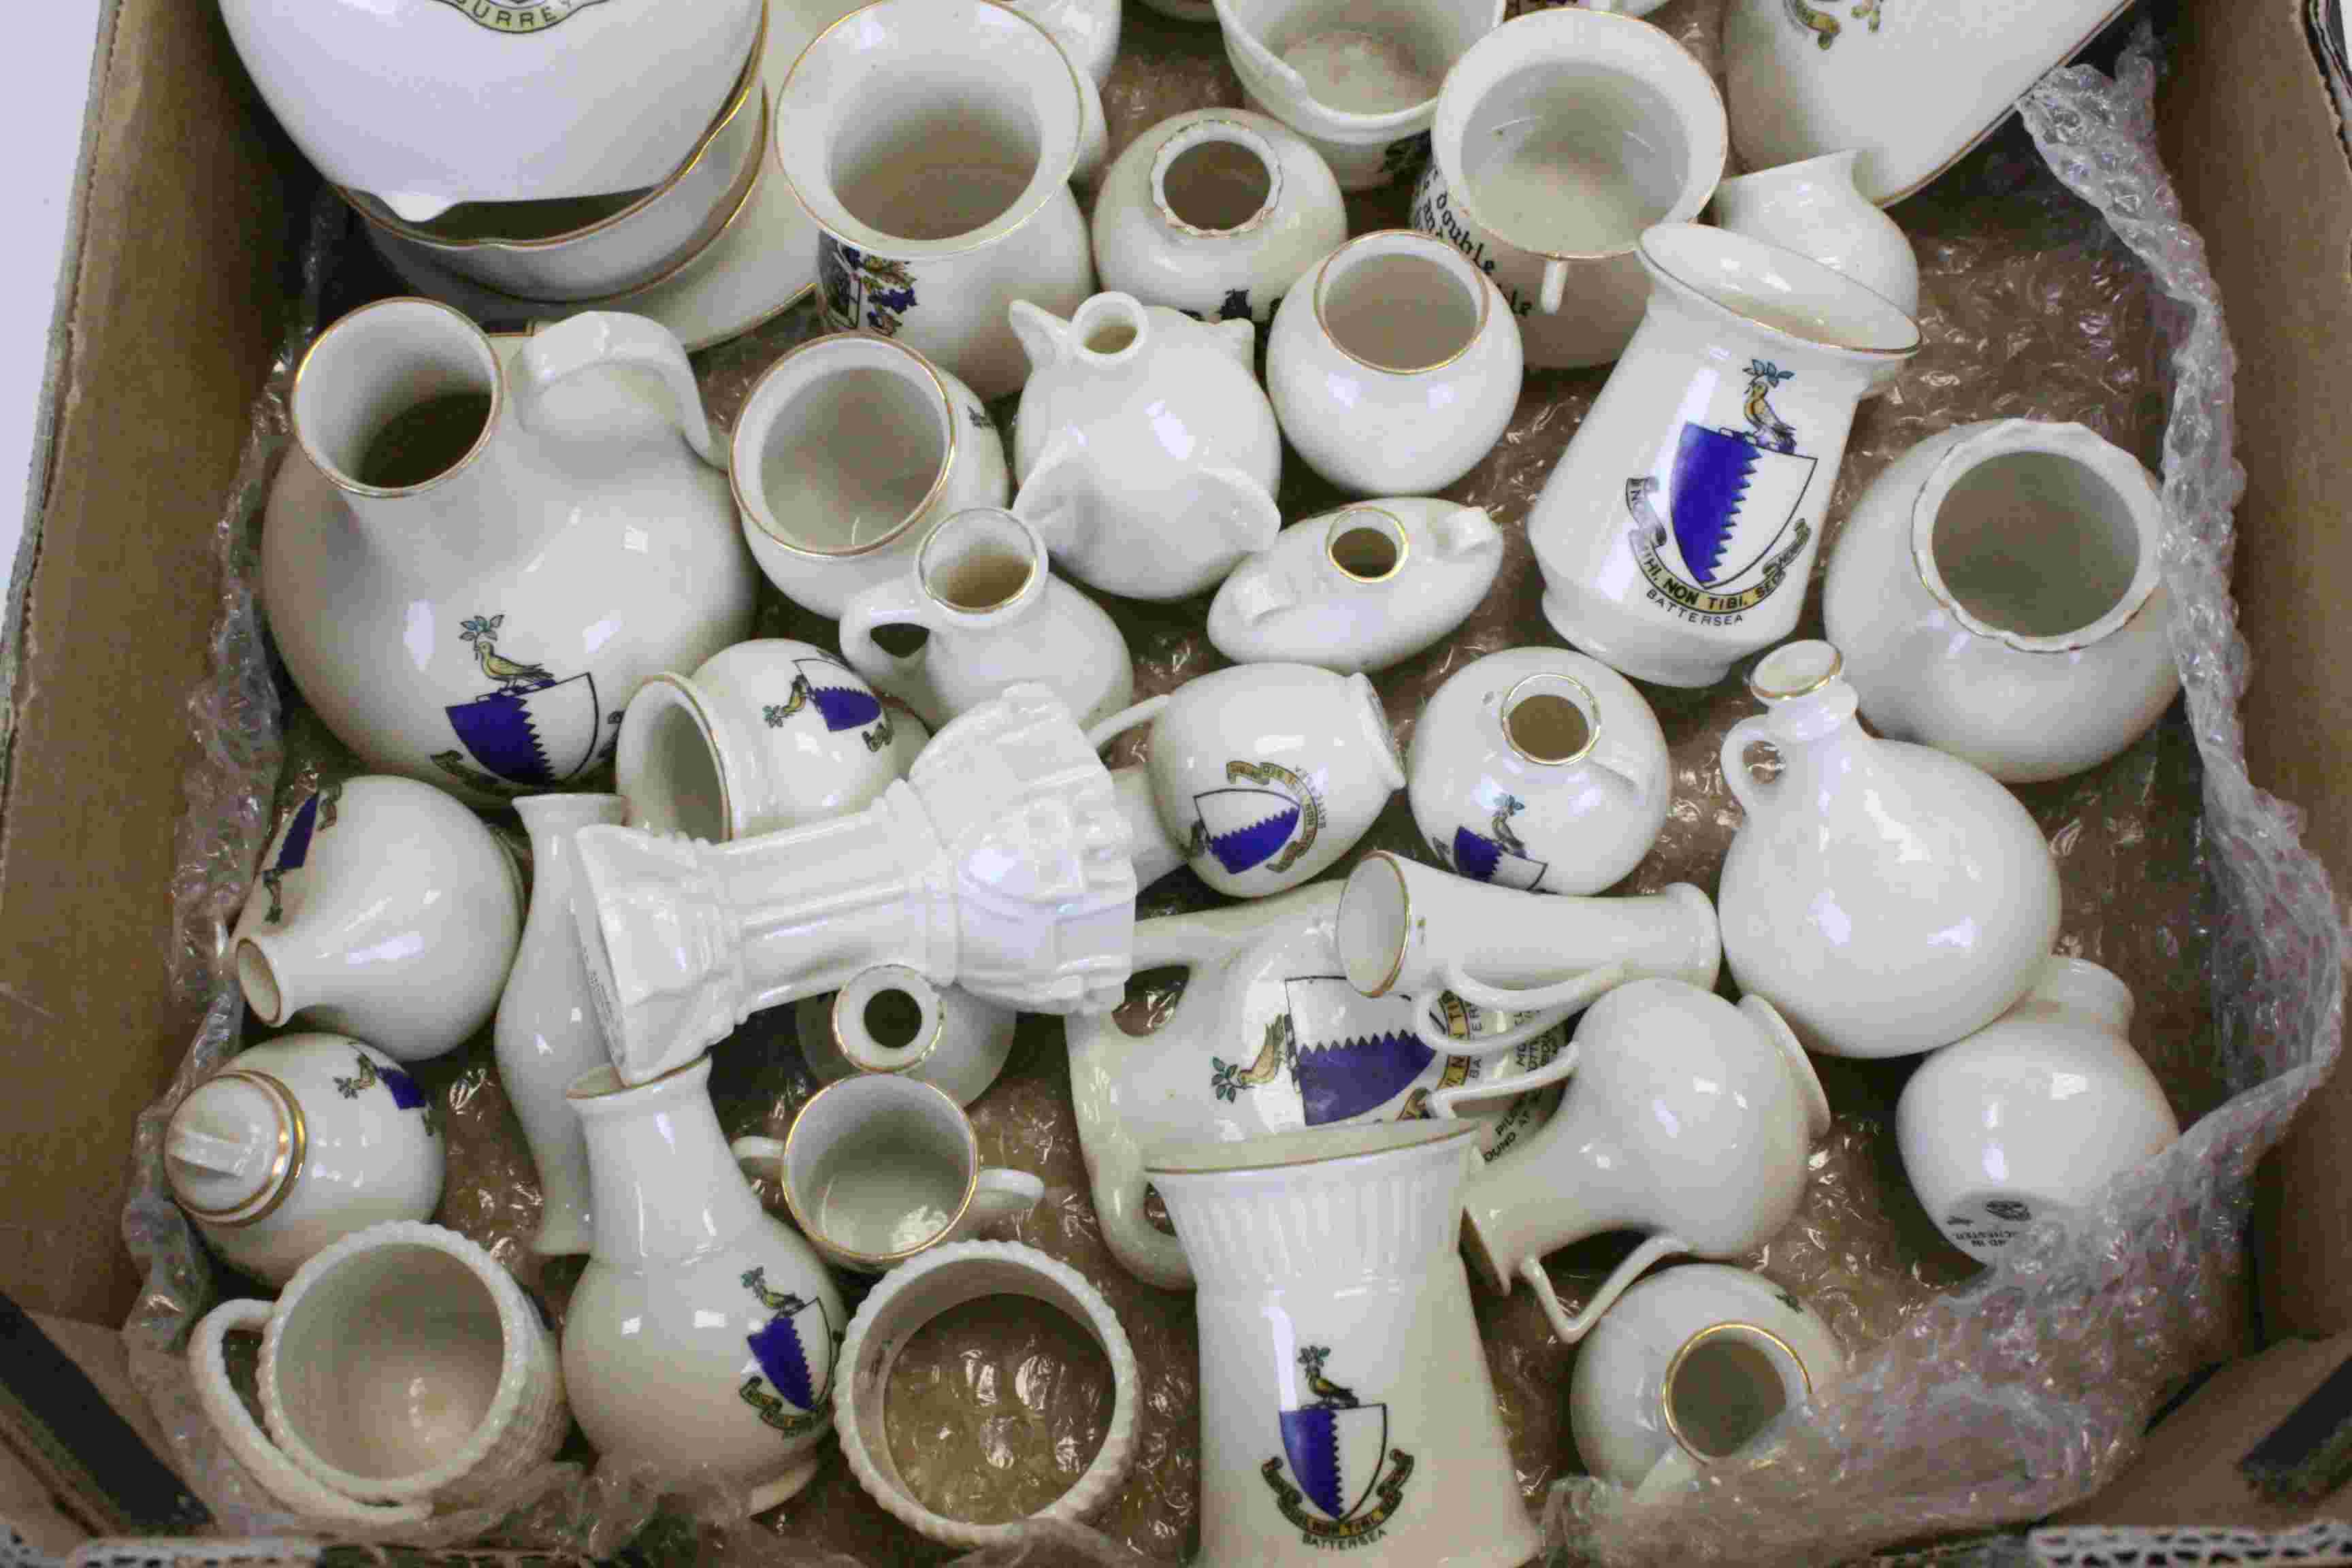 Goss Crested China, approx 60 pieces, mostly bearing crests of London boroughs of Battersea, - Image 4 of 5